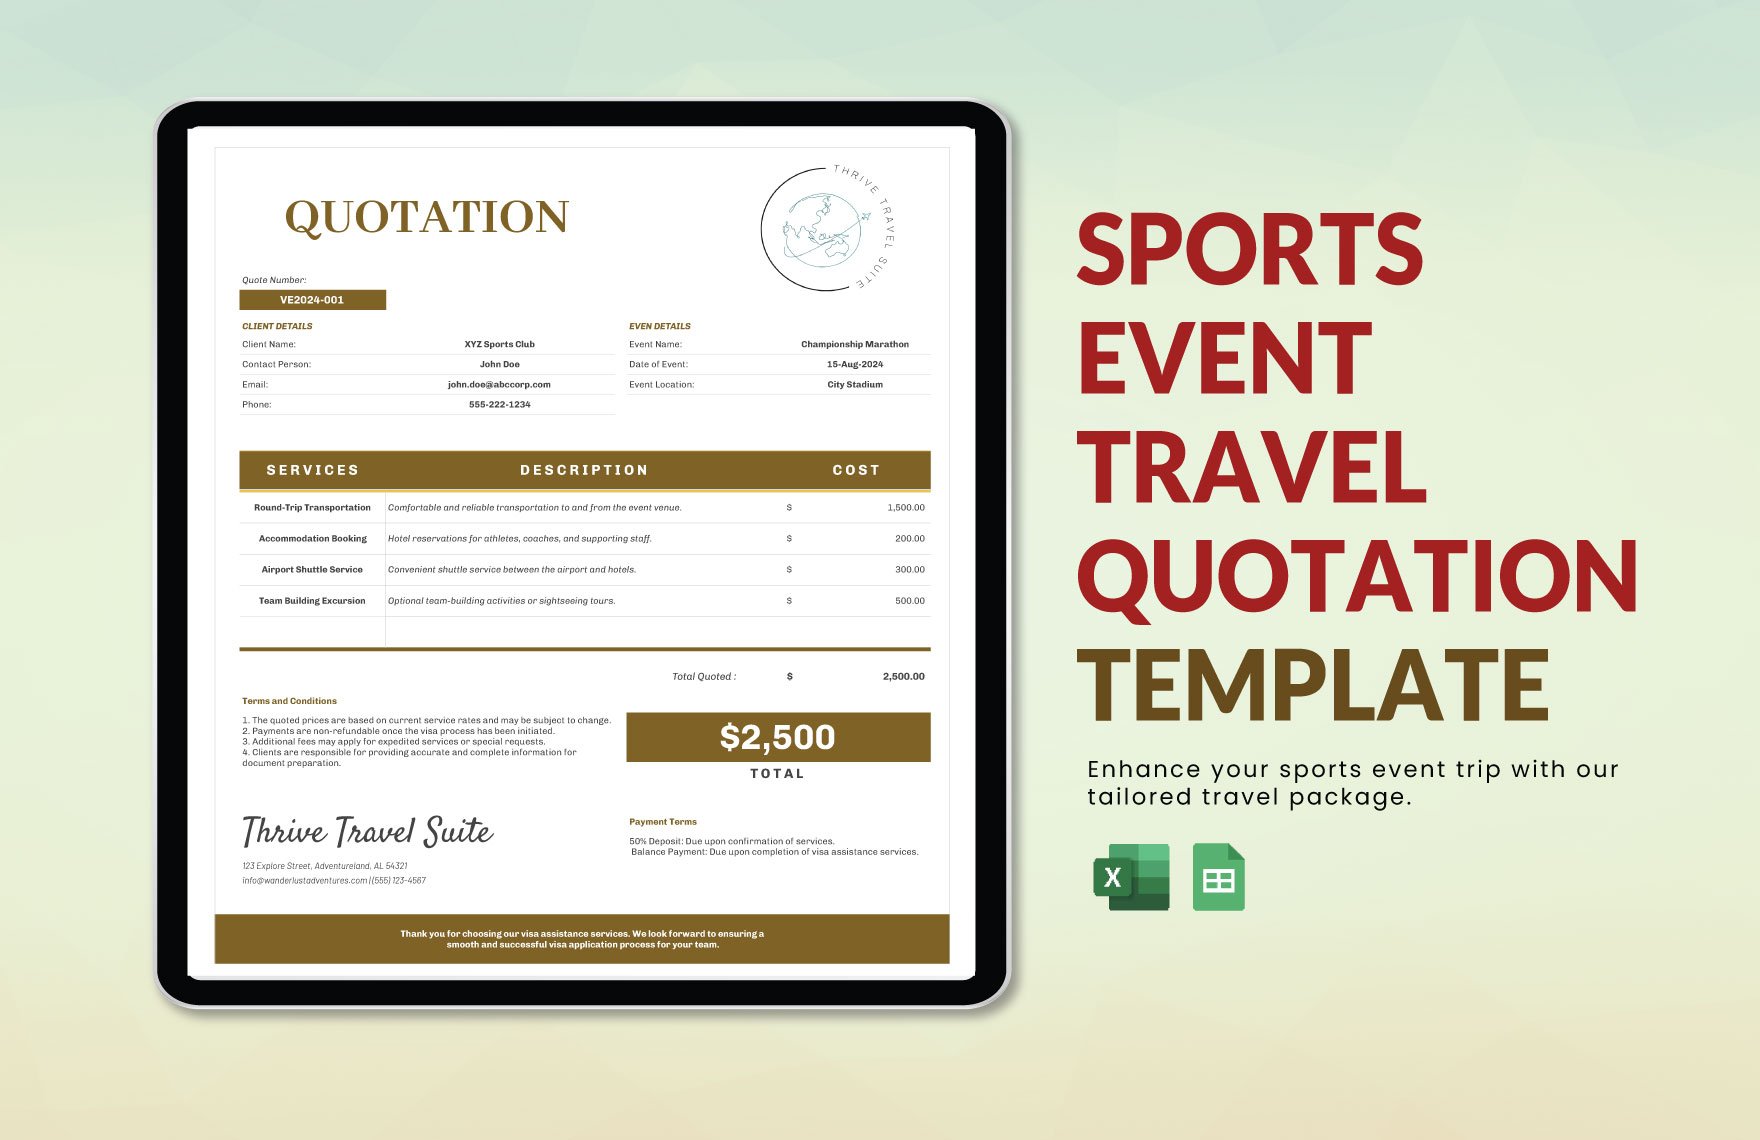 Sports Event Travel Quotation Template